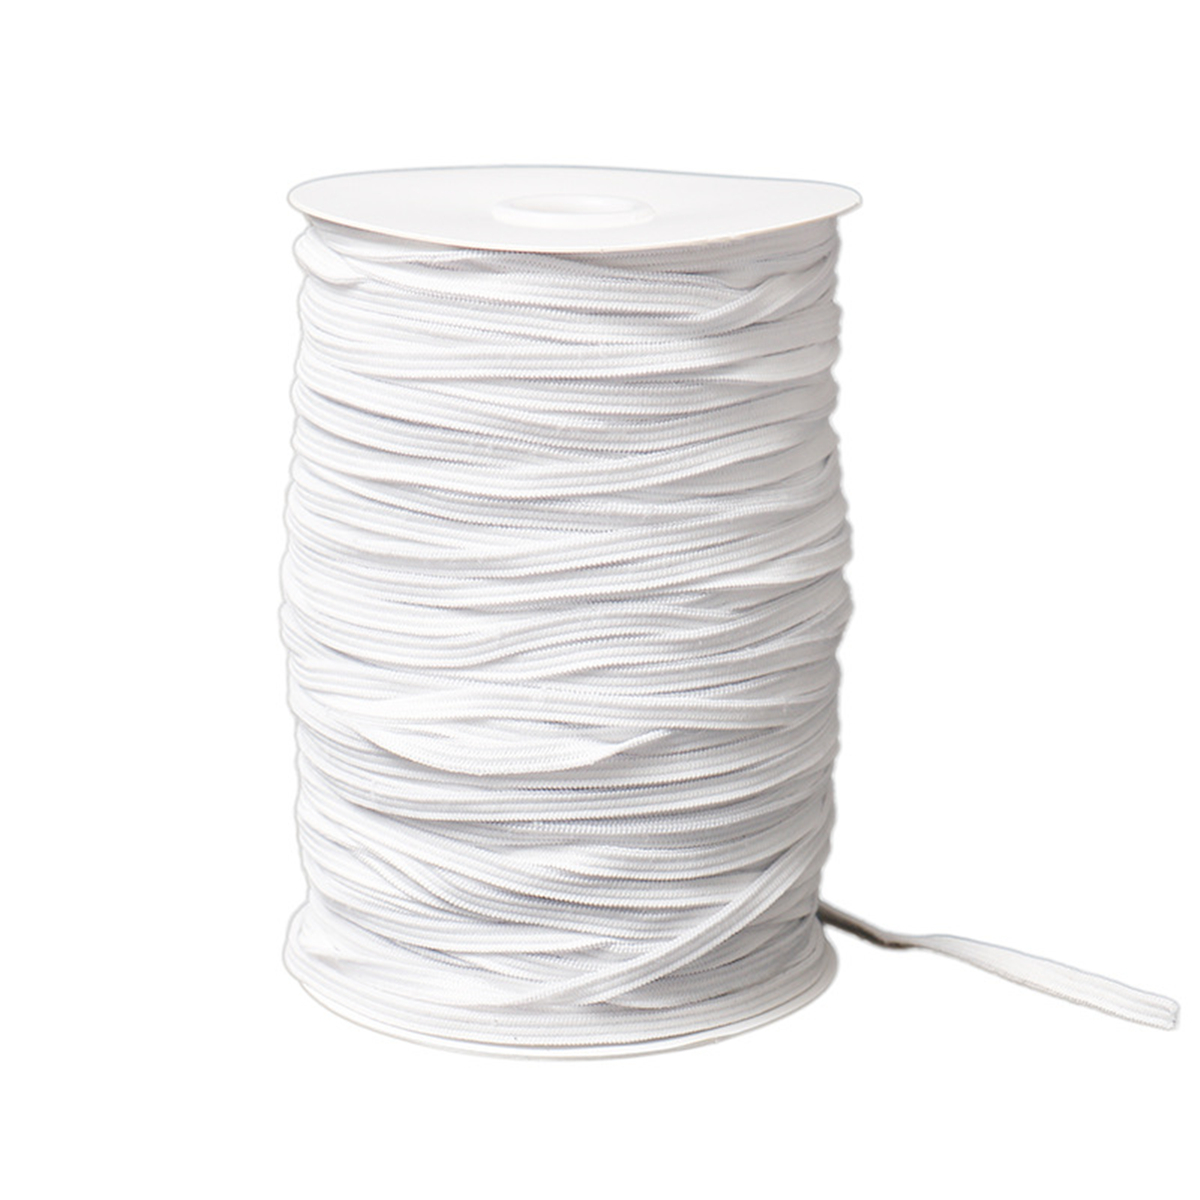 100160-Yards-DIY-Elastic-Band-Sewing-Crafting-Making-Braided-Cords-Knit-White-1671316-6